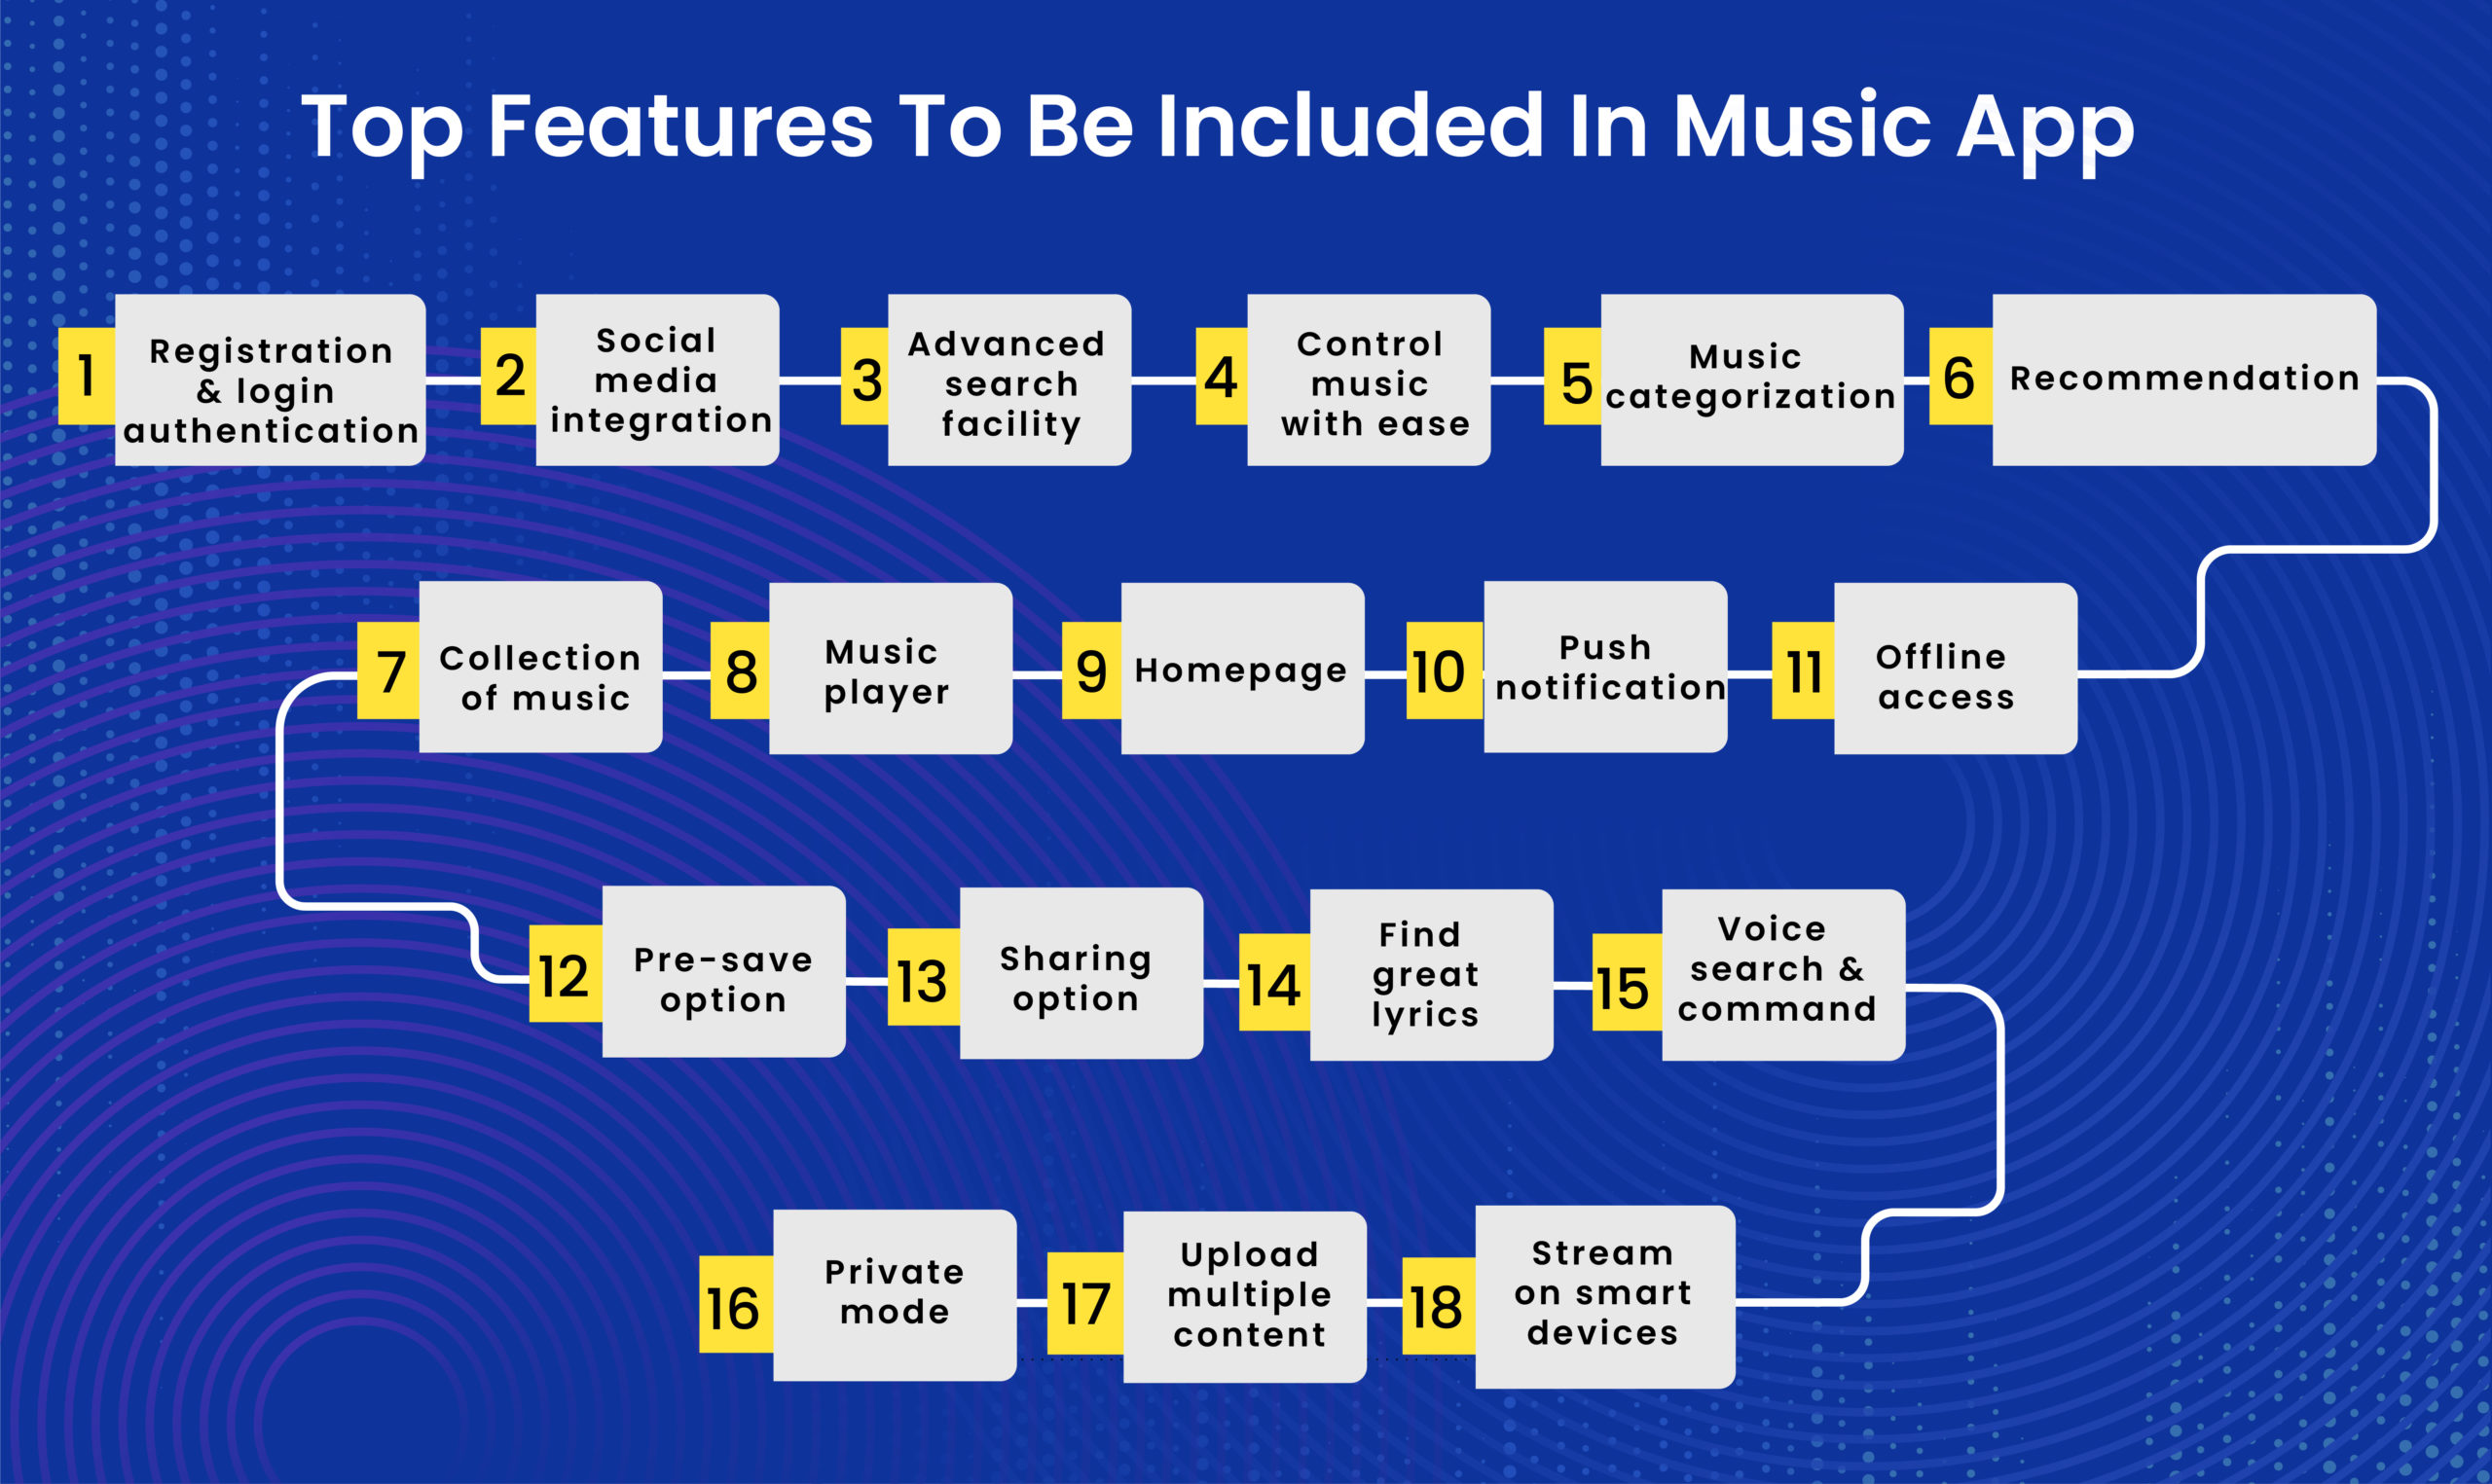 Top Features To Be Included In Music App